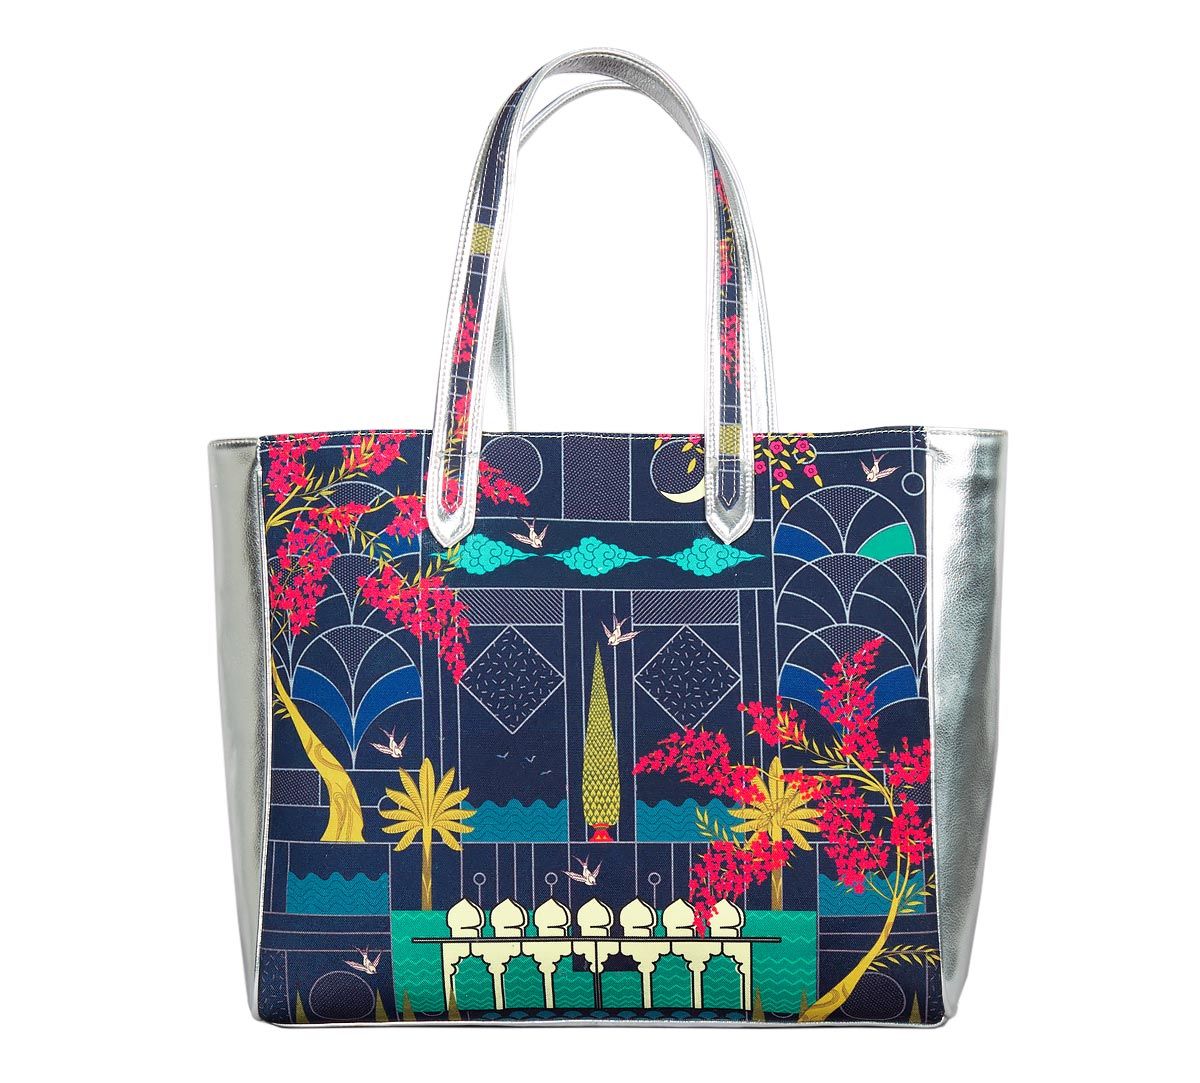 Portico of Divinty Tote Bag